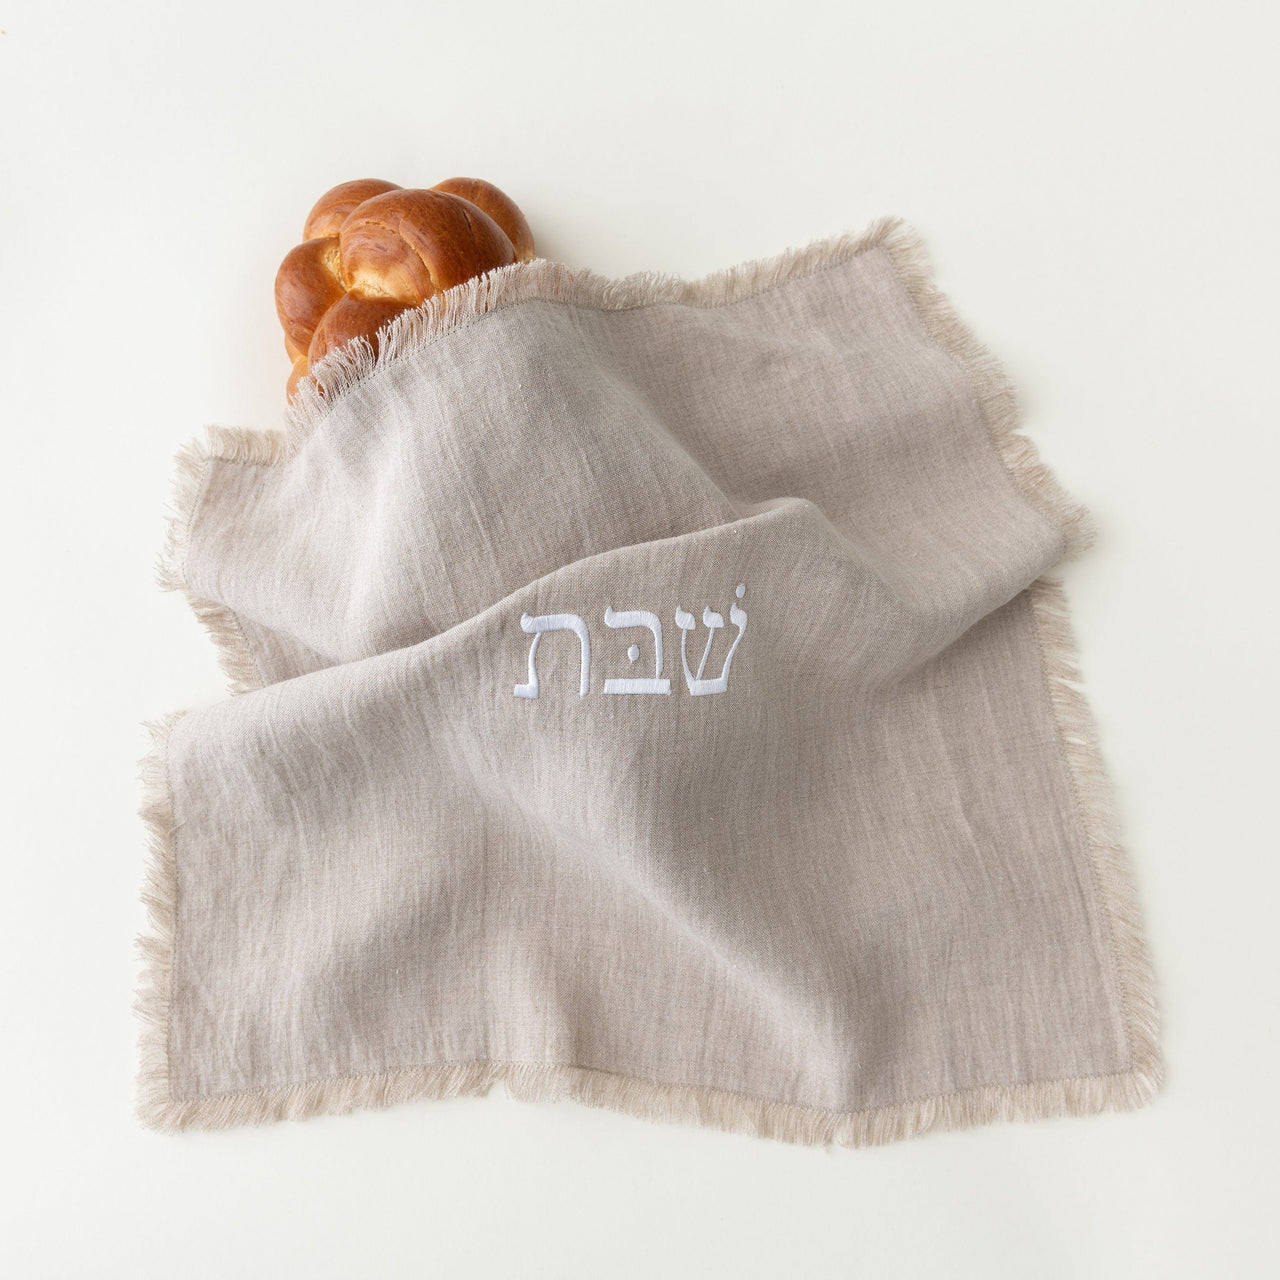 Oneg Challah Covers Embroidered Linen Challah Cover - Natural